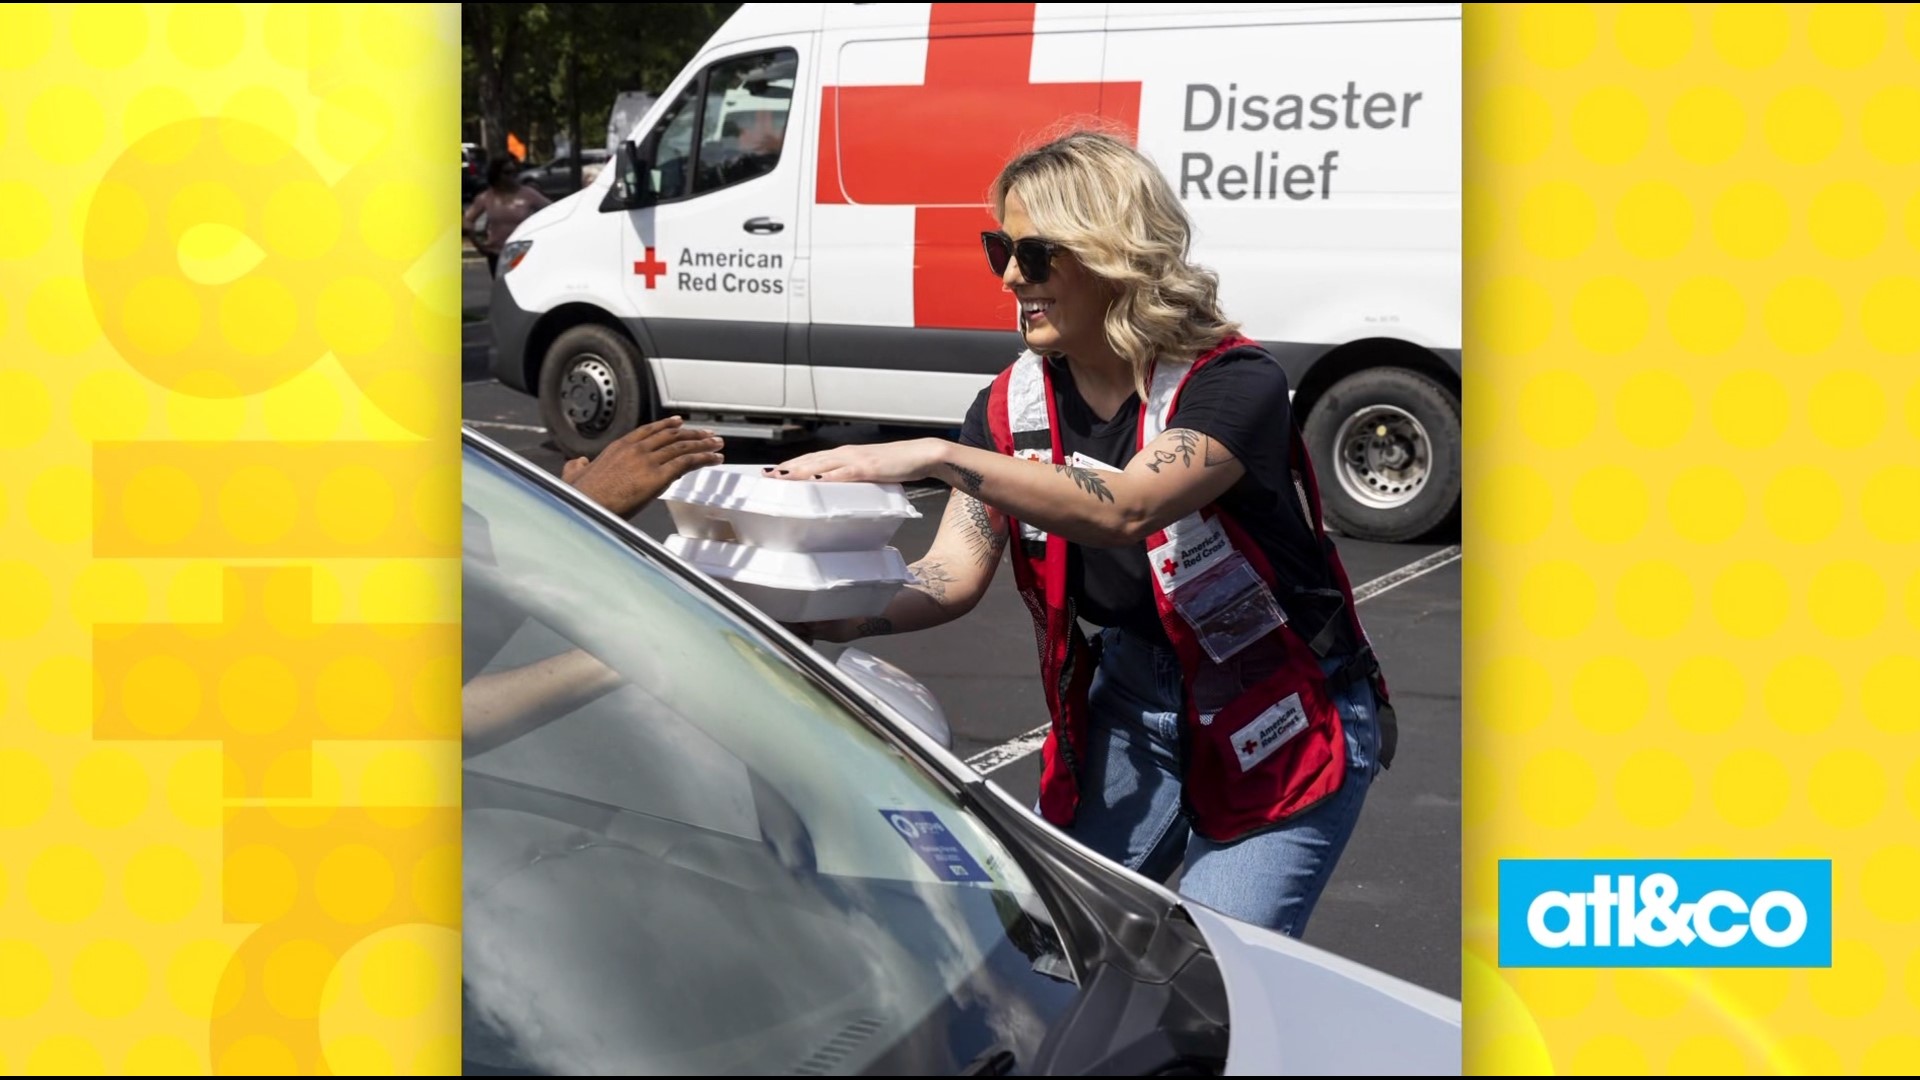 The American Red Cross asks the community to come together. Get involved at RedCross.org, call 1-800-RED-CROSS, or TEXT  "REDCROSS"  TO 90999